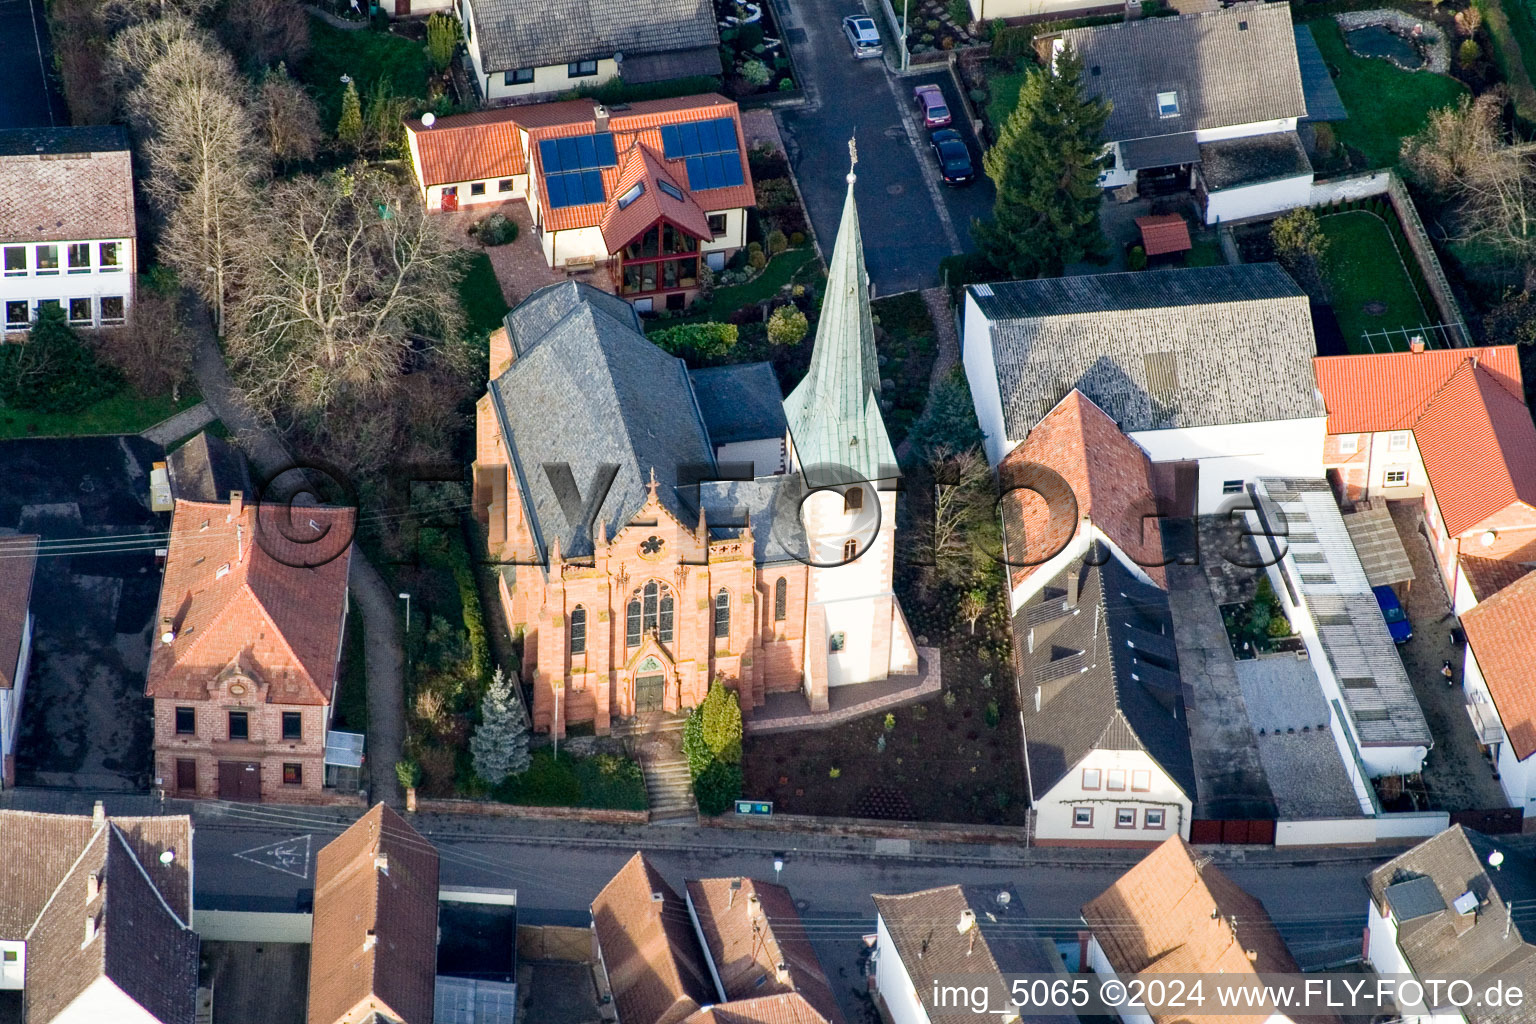 Church building of the catholic church St. Michael in the village of in the district Duttweiler in Neustadt an der Weinstrasse in the state Rhineland-Palatinate